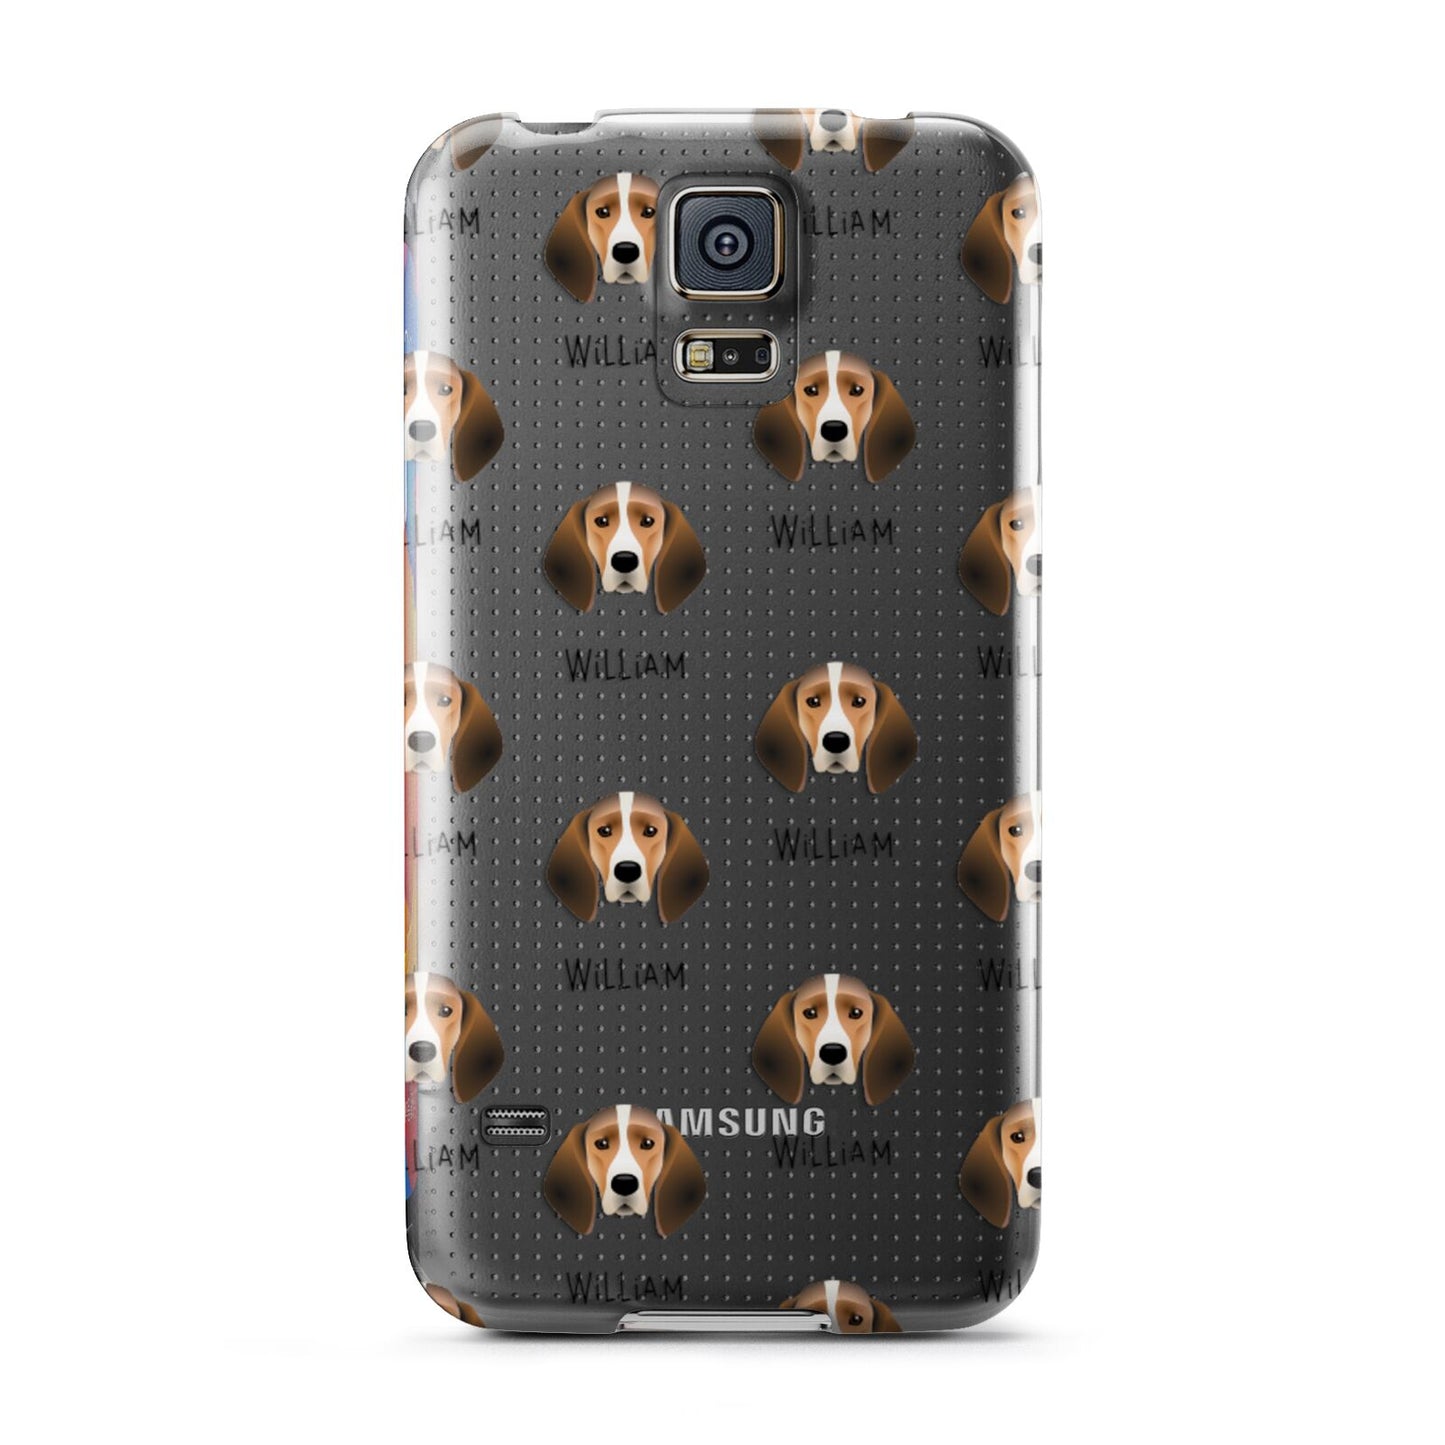 Trailhound Icon with Name Samsung Galaxy S5 Case